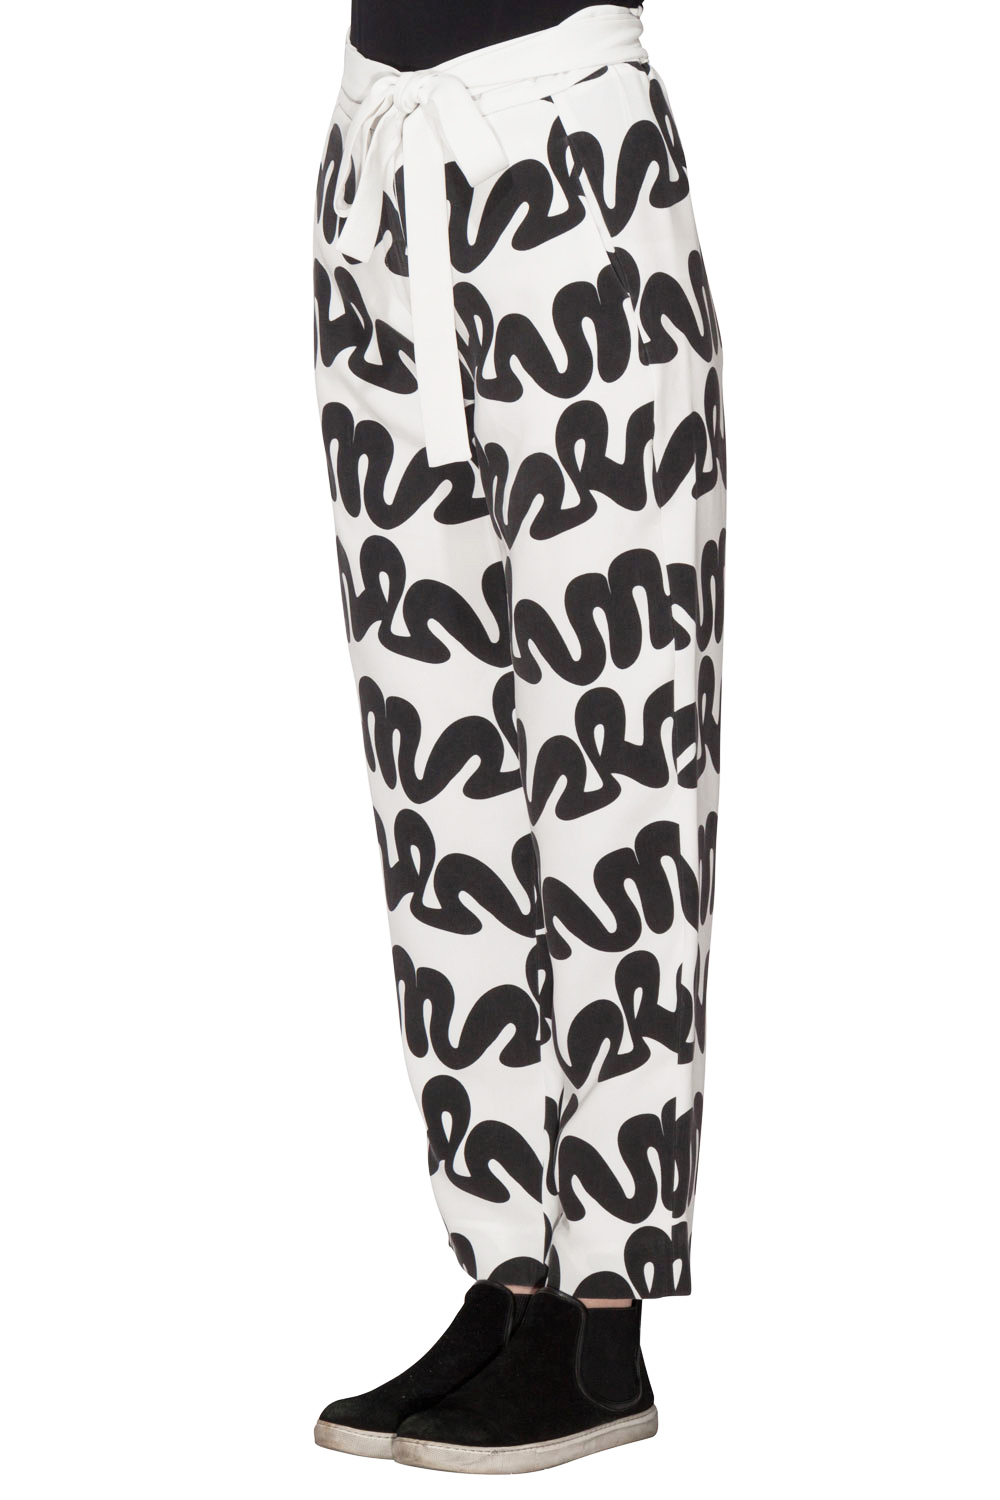 Issa Black and White Squiggle Print Waist Tie Detail Ola Pants S